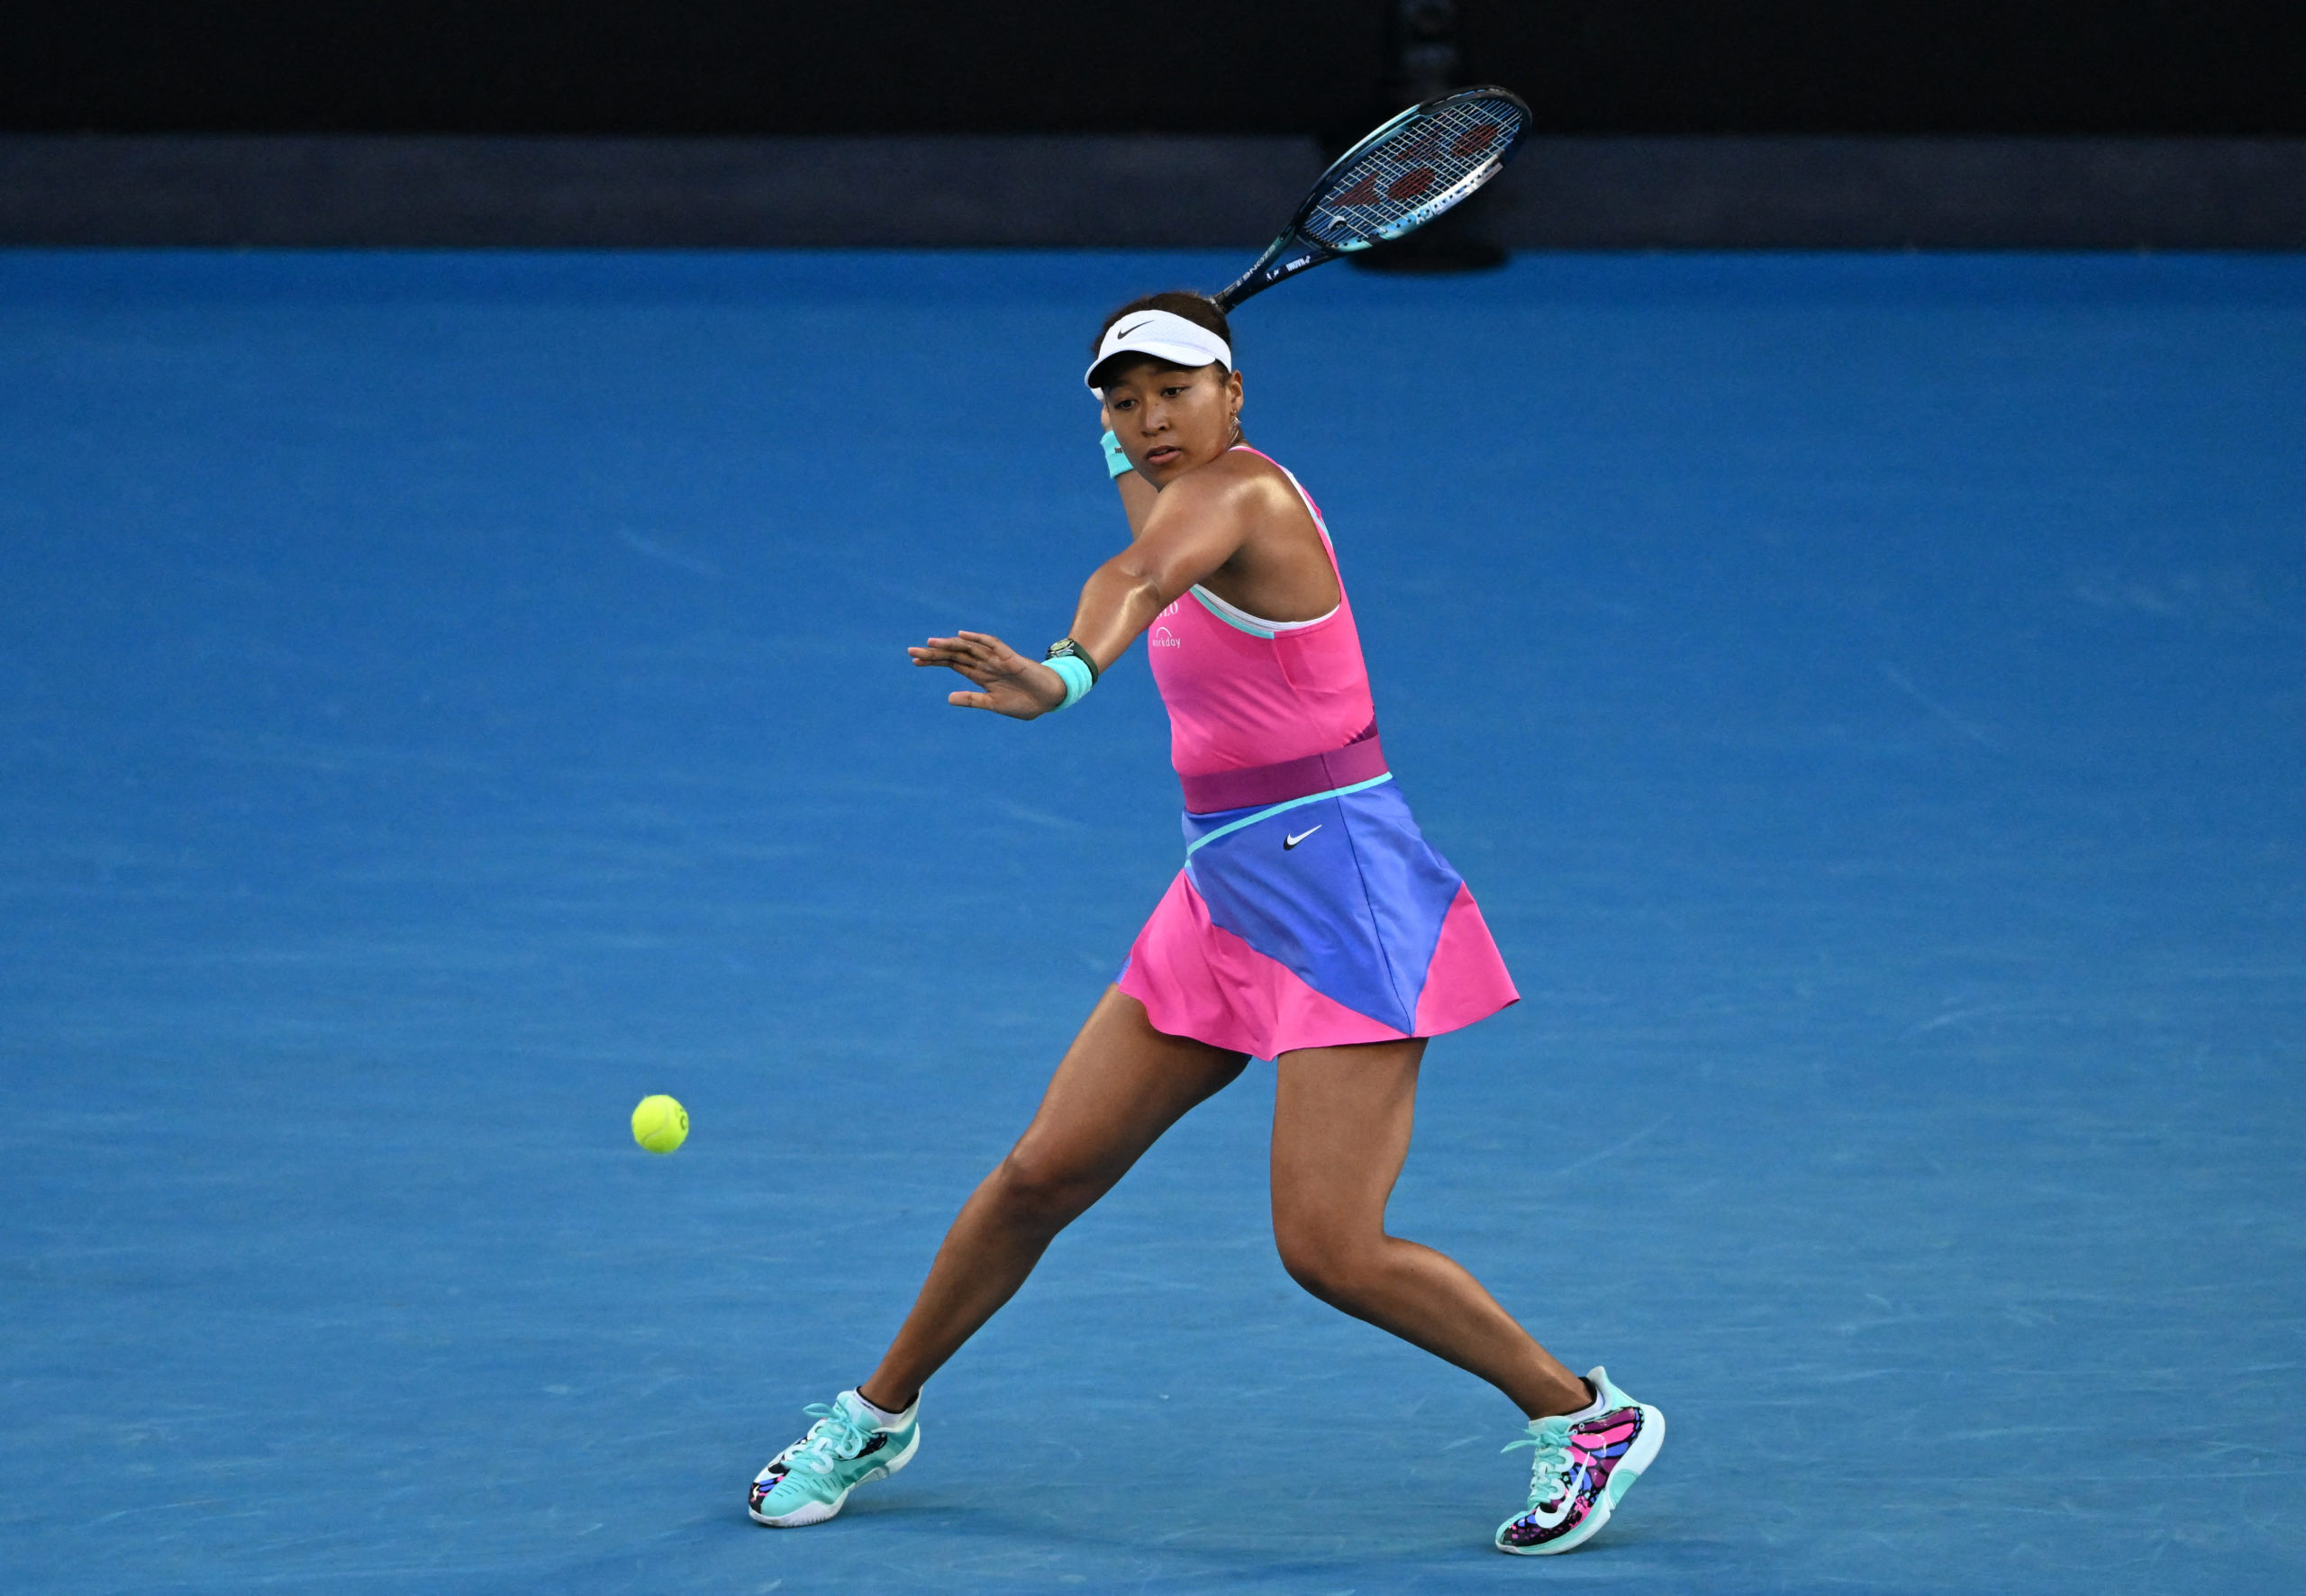 Tennis - Australian Open - Melbourne Park, Melbourne, Australia - January 19, 2022 Japan's Naomi Osaka in action during her second round match against Madison Brengle of the U.S. 